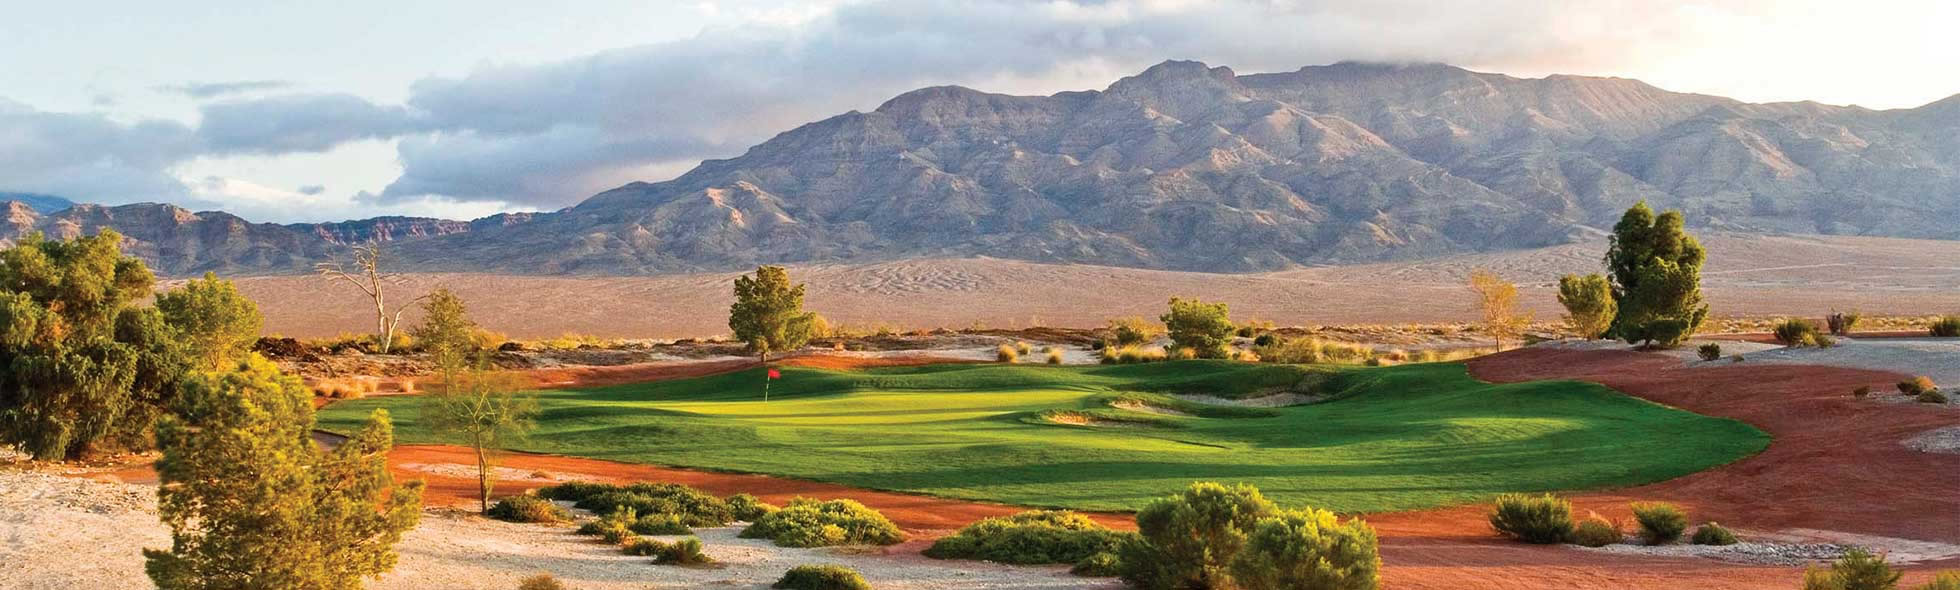 Know Before You Golf Vegas this Fall